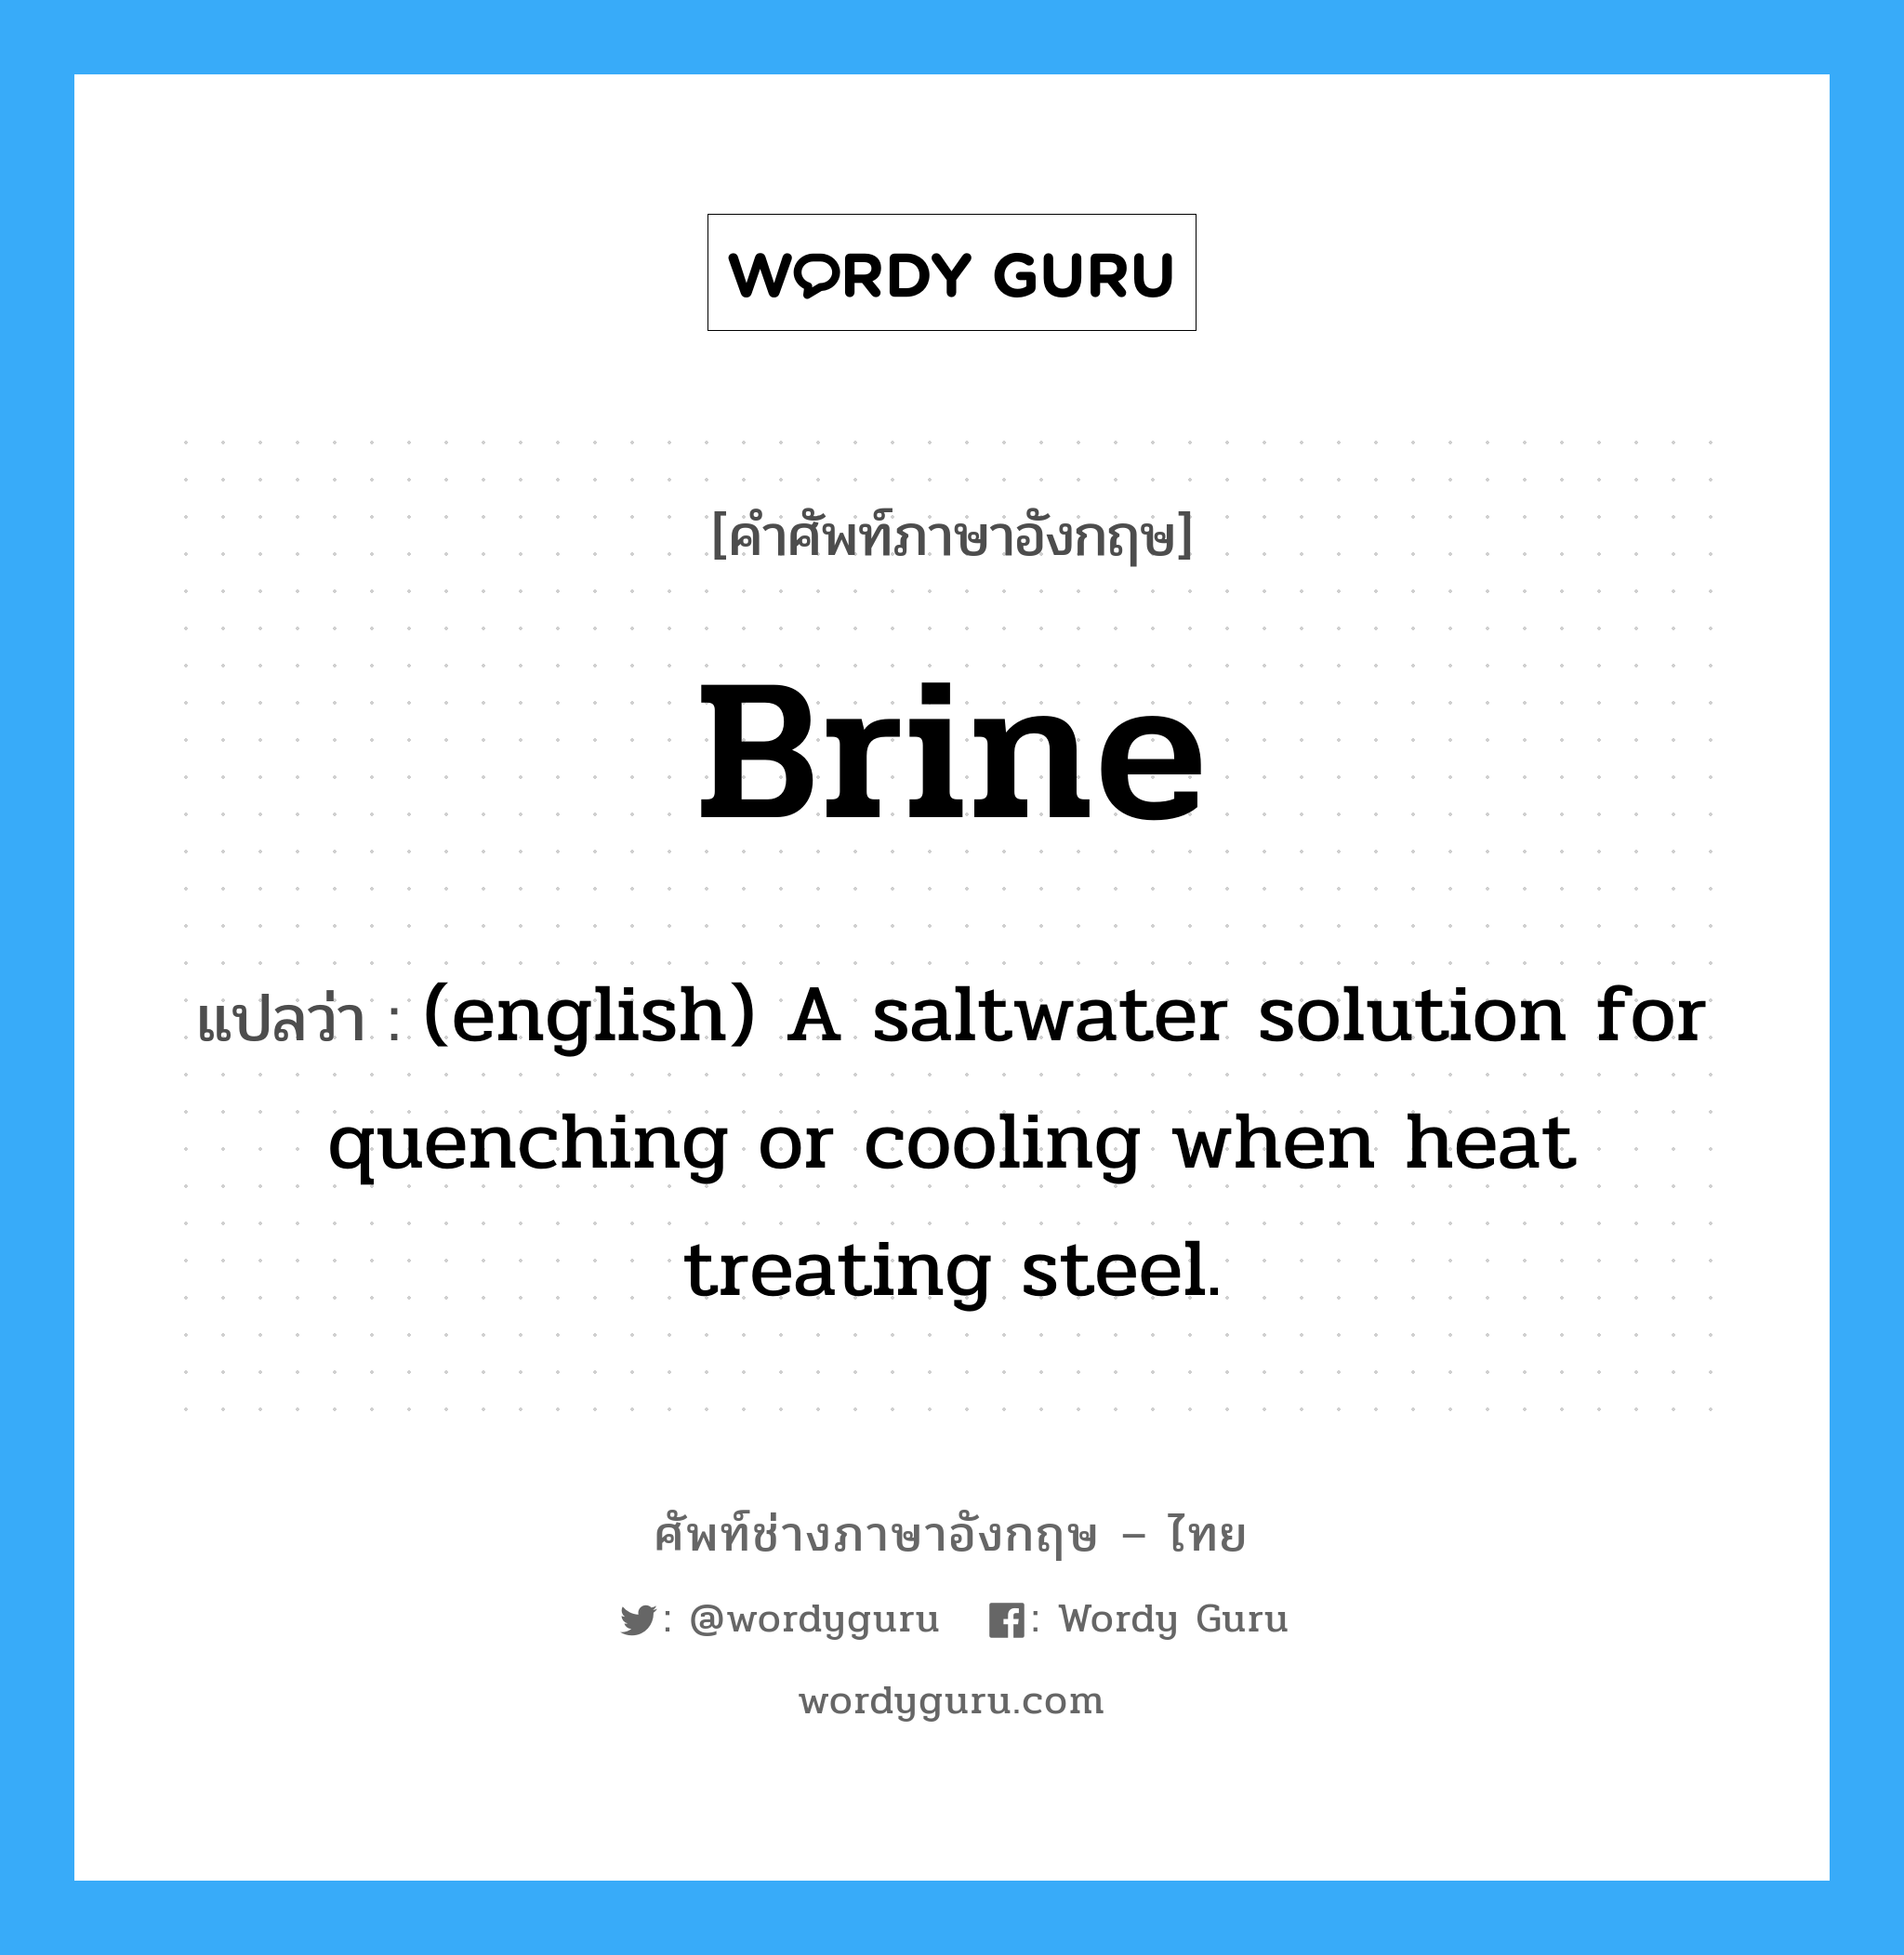 Brine แปลว่า?, คำศัพท์ช่างภาษาอังกฤษ - ไทย Brine คำศัพท์ภาษาอังกฤษ Brine แปลว่า (english) A saltwater solution for quenching or cooling when heat treating steel.